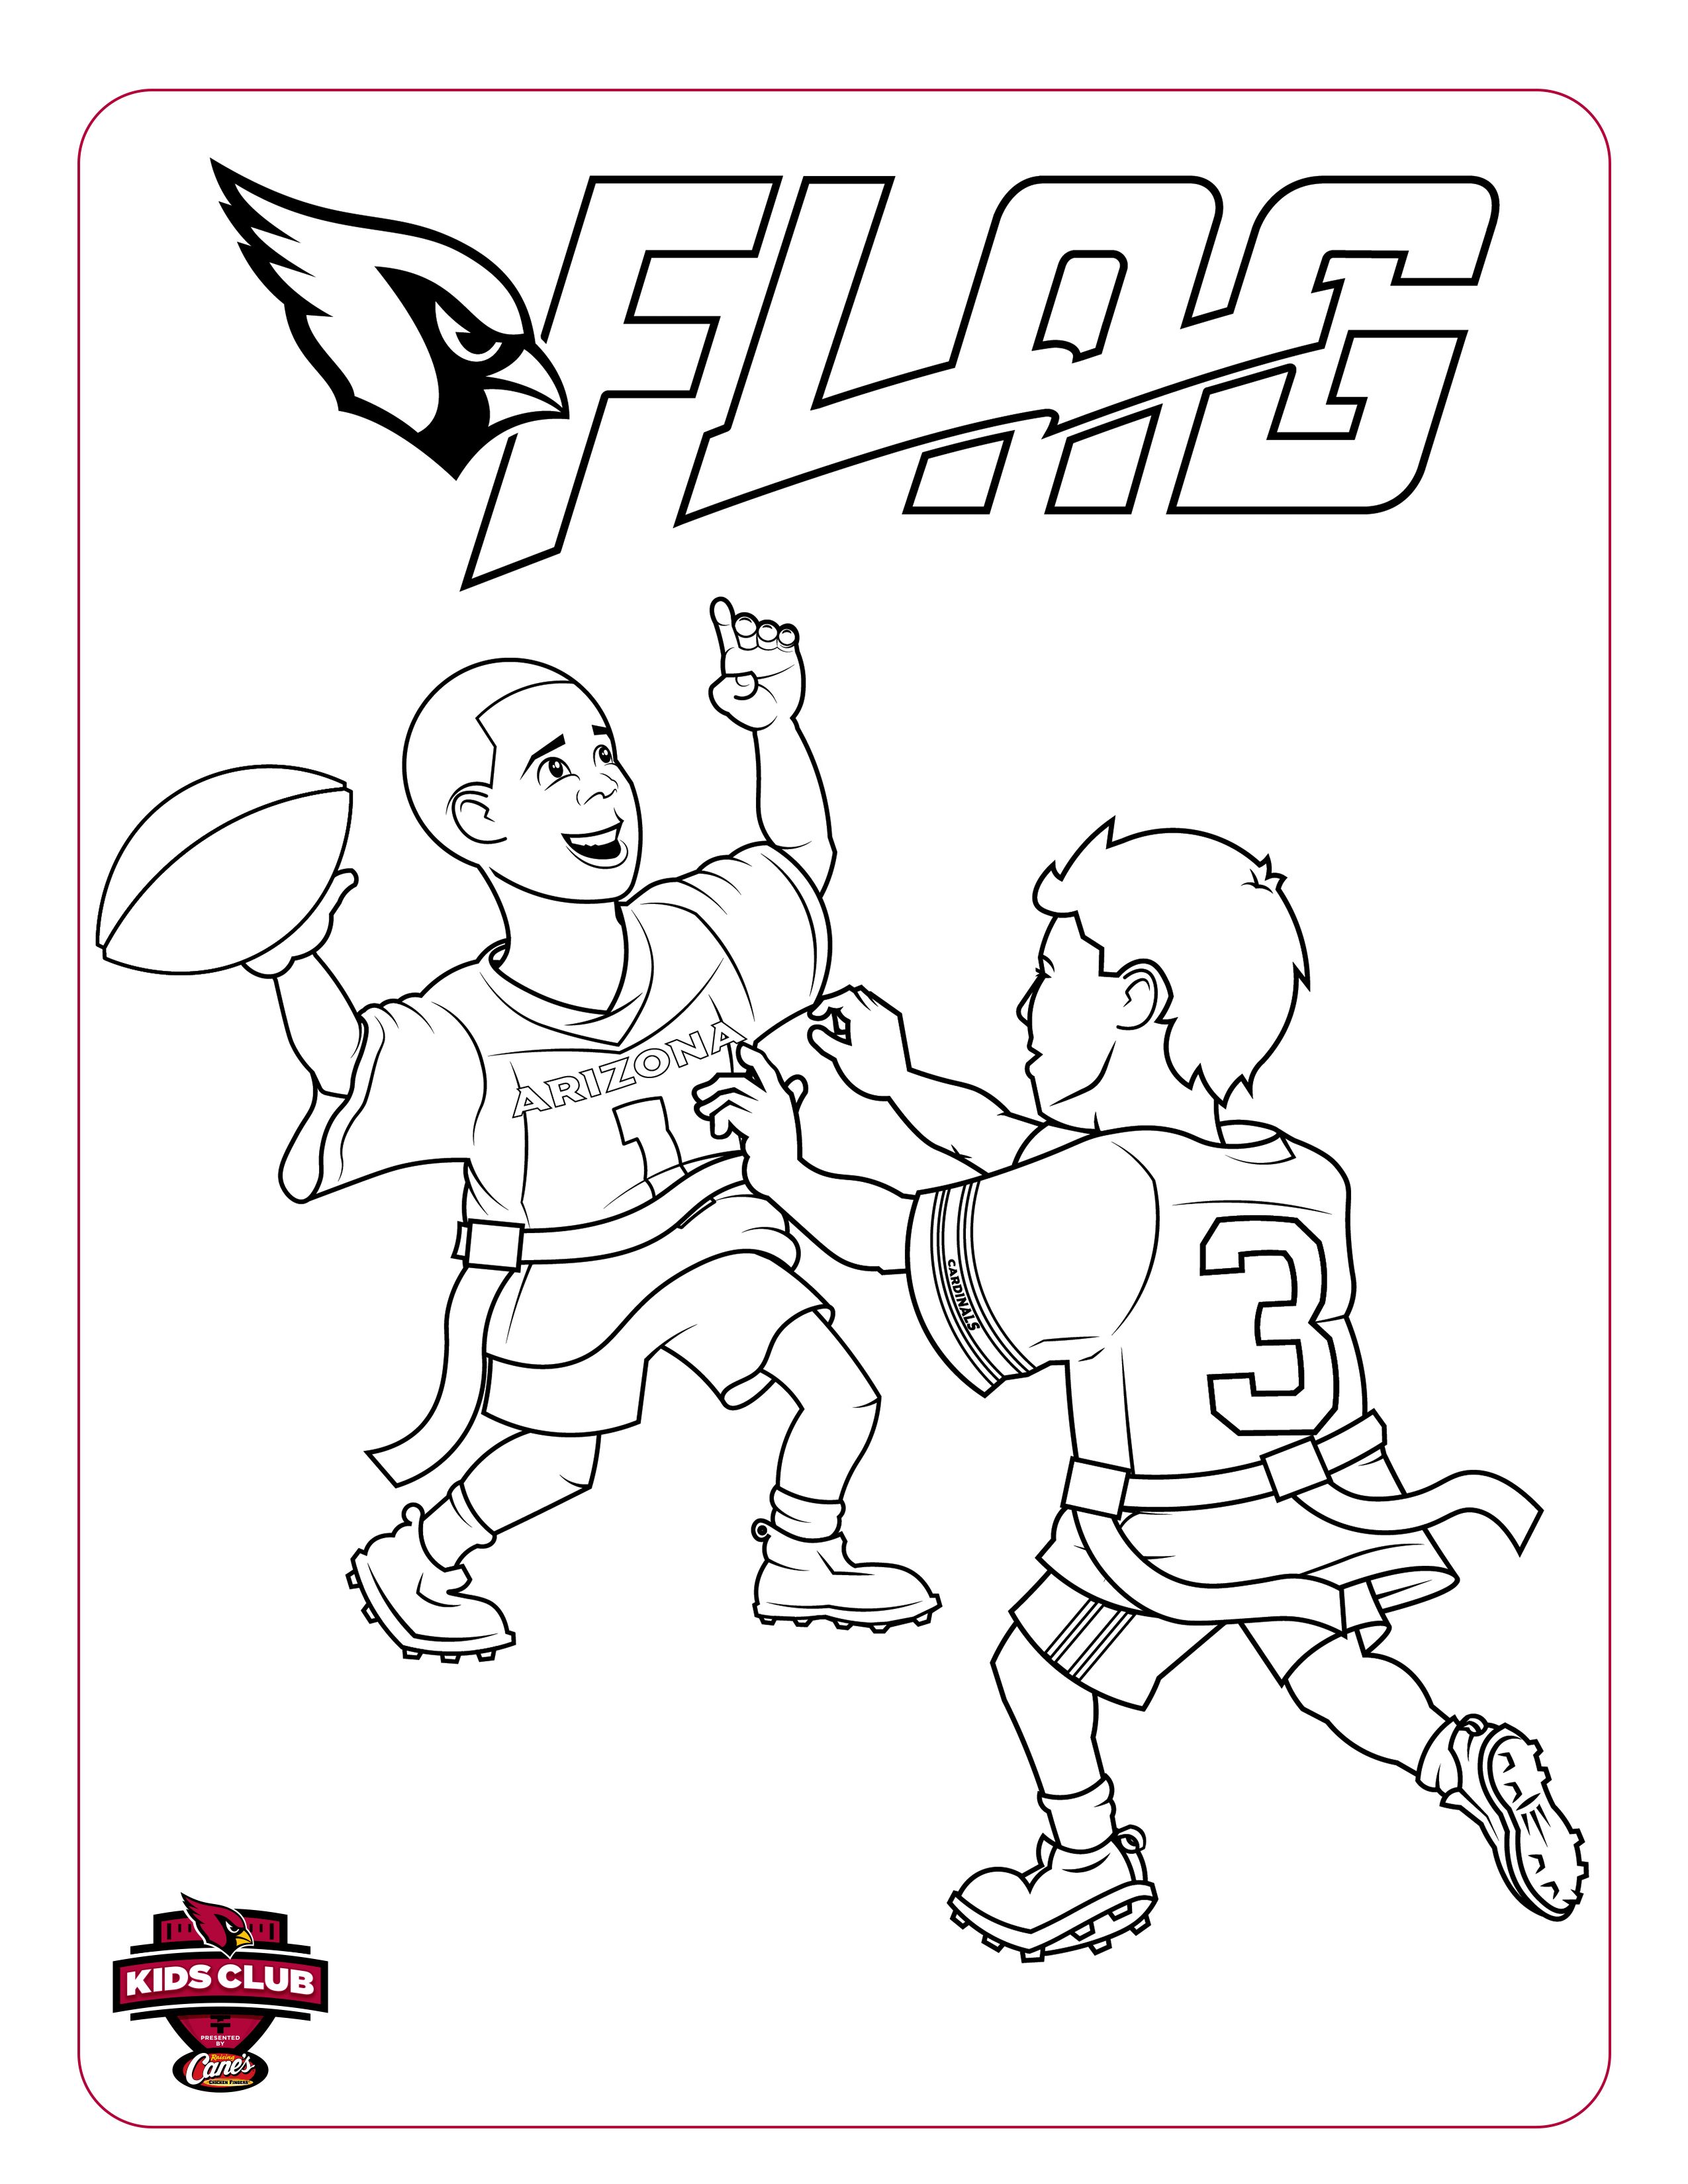 Cool Coloring Pages Baltimore Ravens - NFL American football teams logos  coloring pages - Cool Coloring Pages